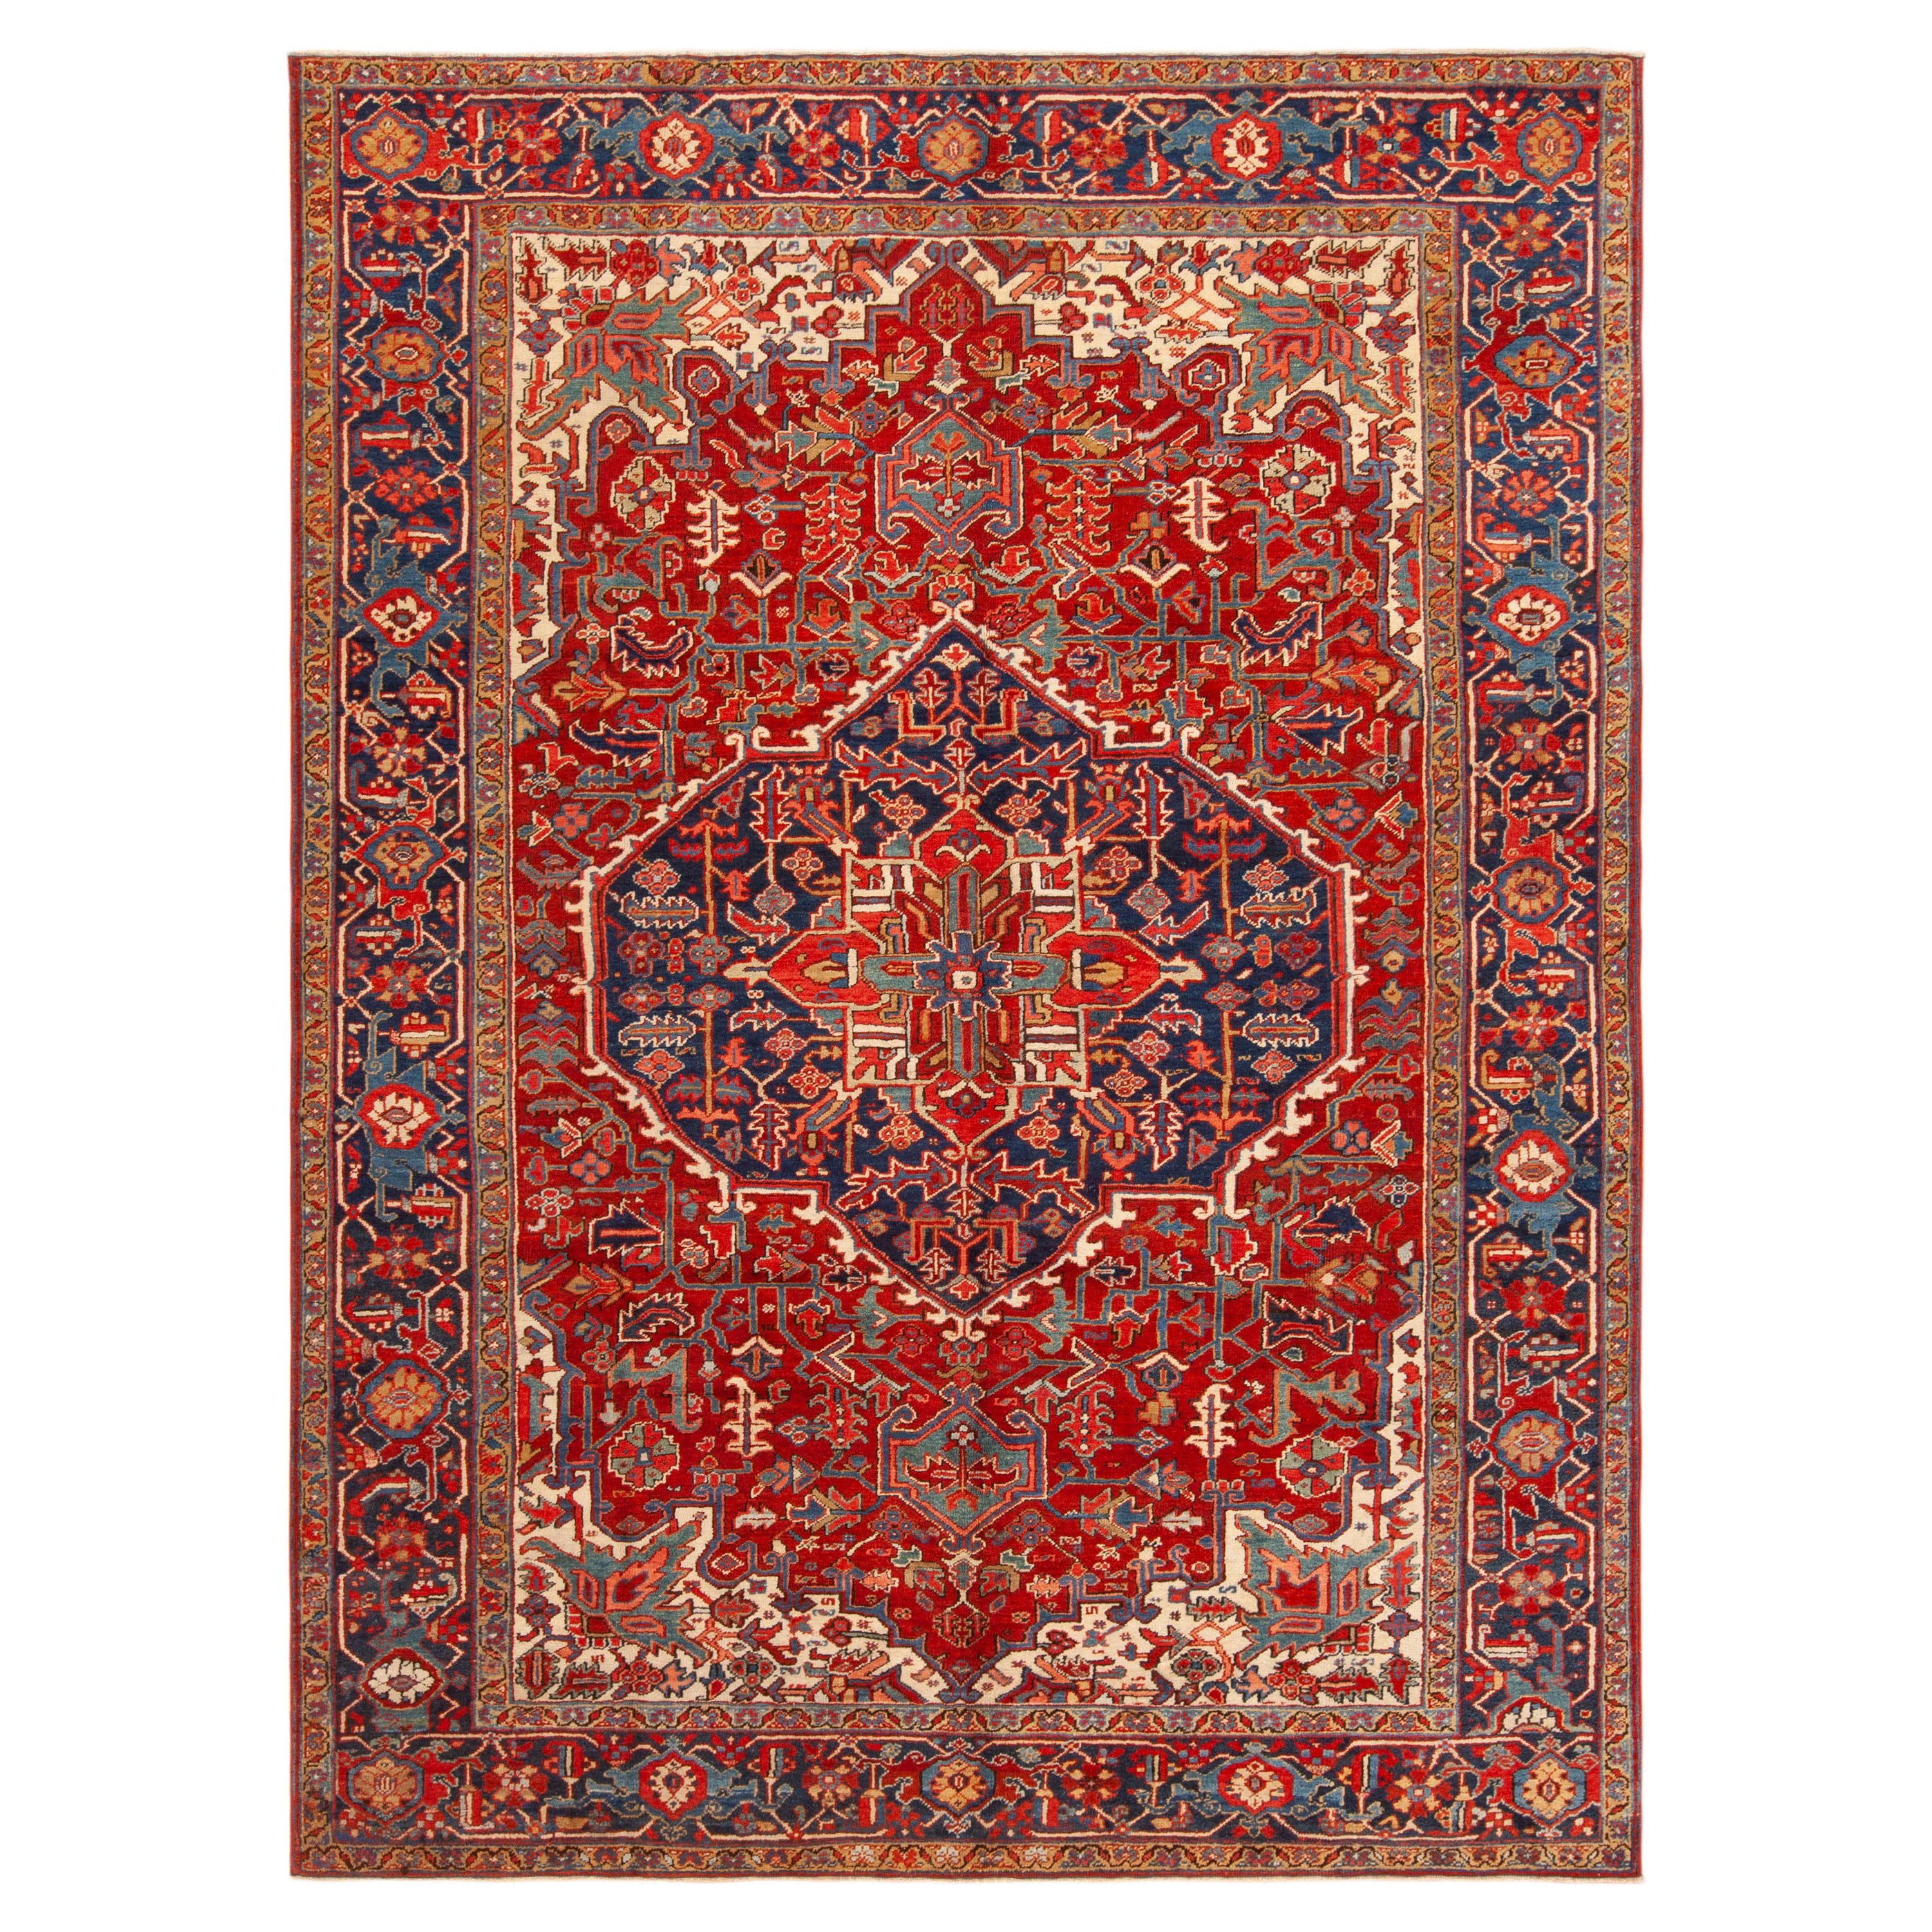 Gorgeous Antique Red Geometric Medallion Persian Heriz Rug 8'7" x 11'4" For Sale